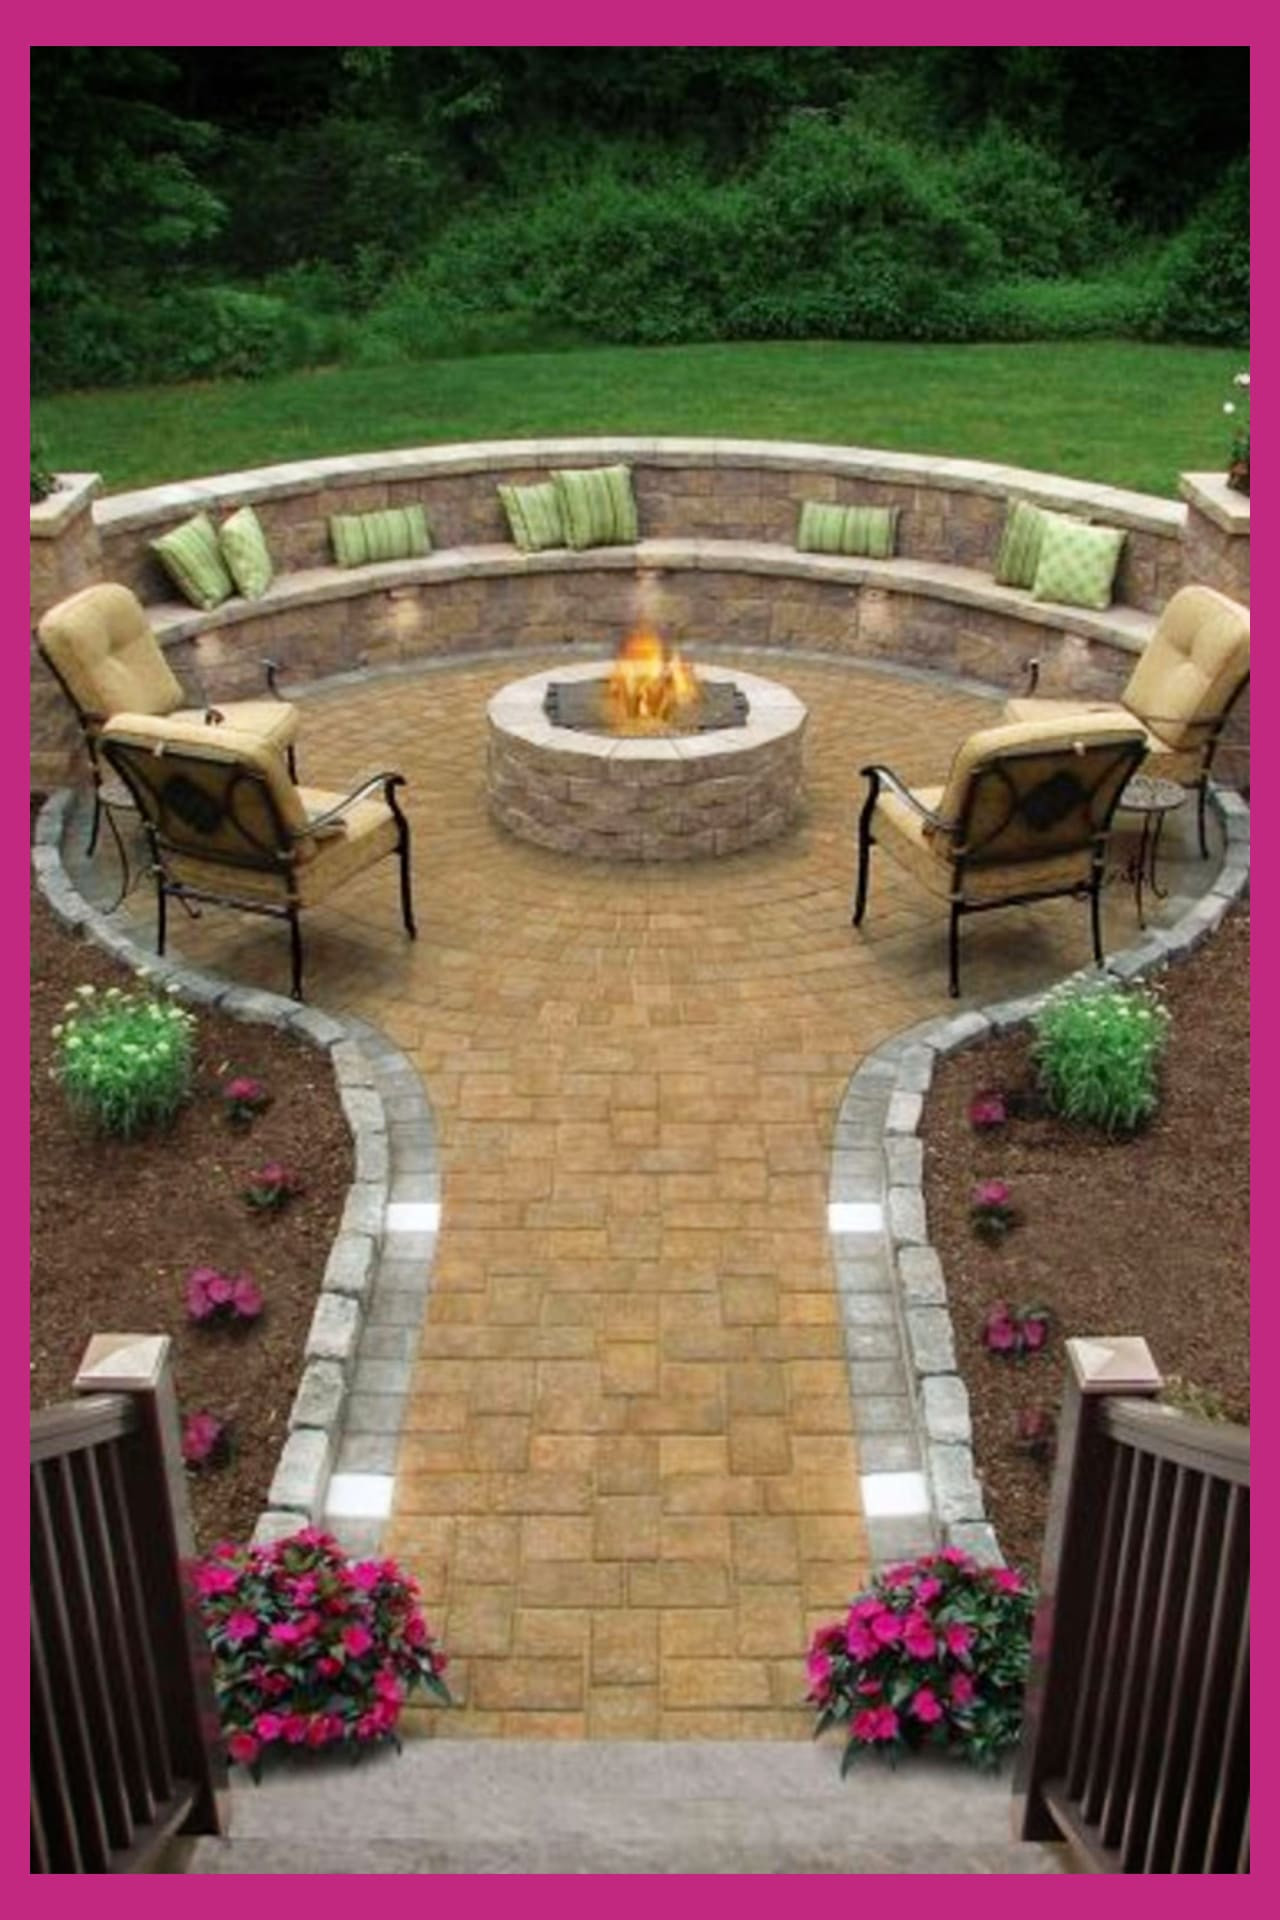 Fire Pit On Patio
 Backyard Fire Pit Ideas and Designs for Your Yard Deck or